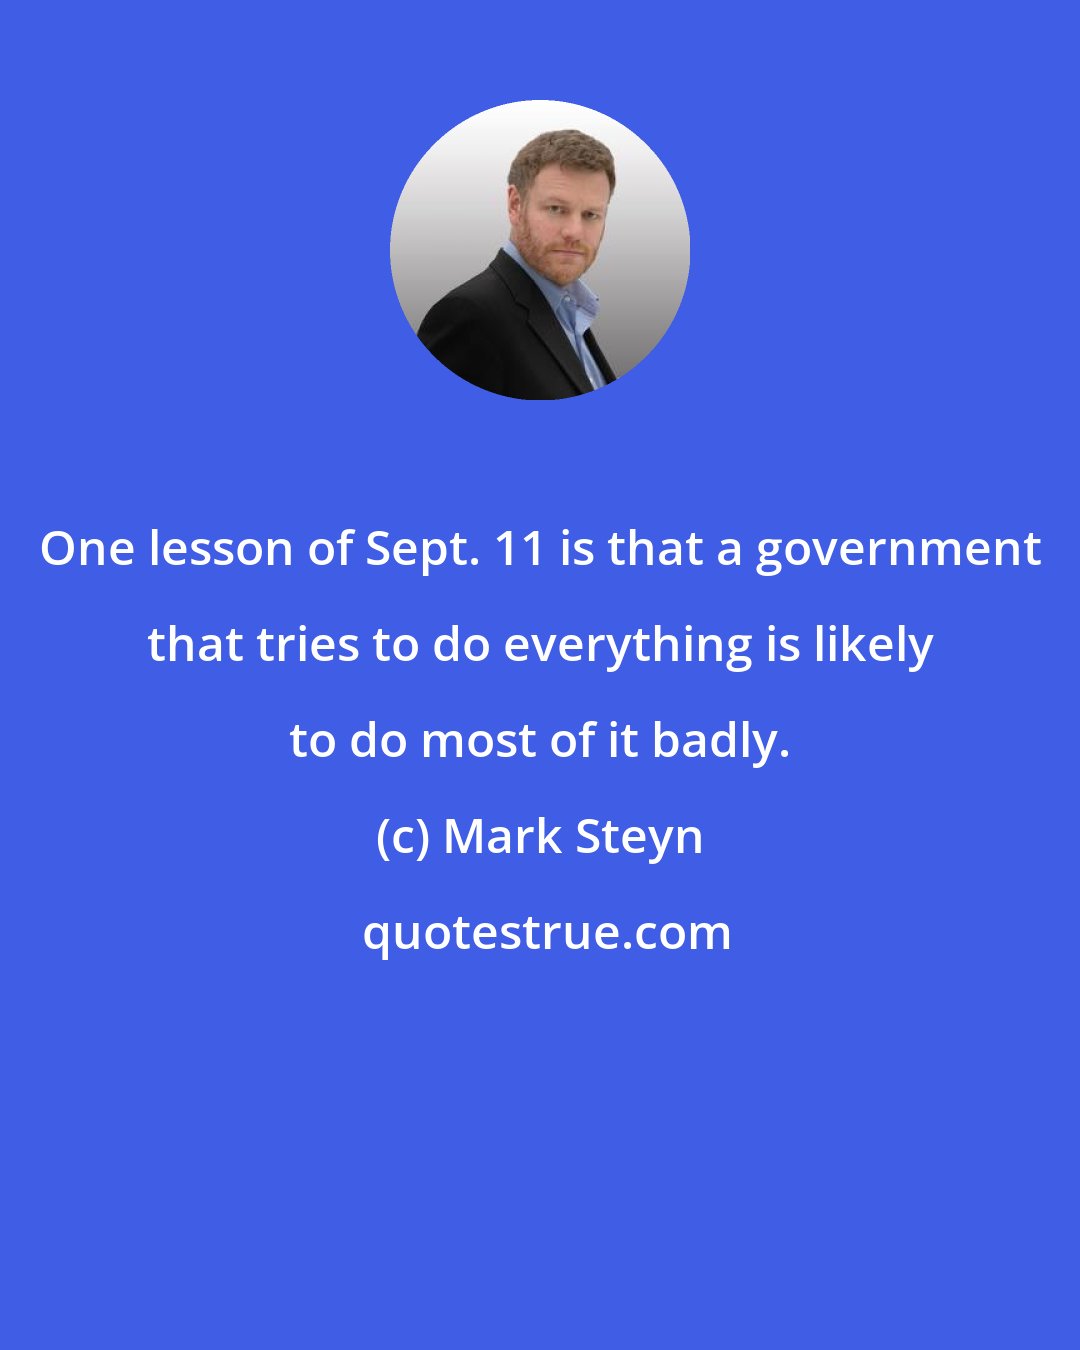 Mark Steyn: One lesson of Sept. 11 is that a government that tries to do everything is likely to do most of it badly.